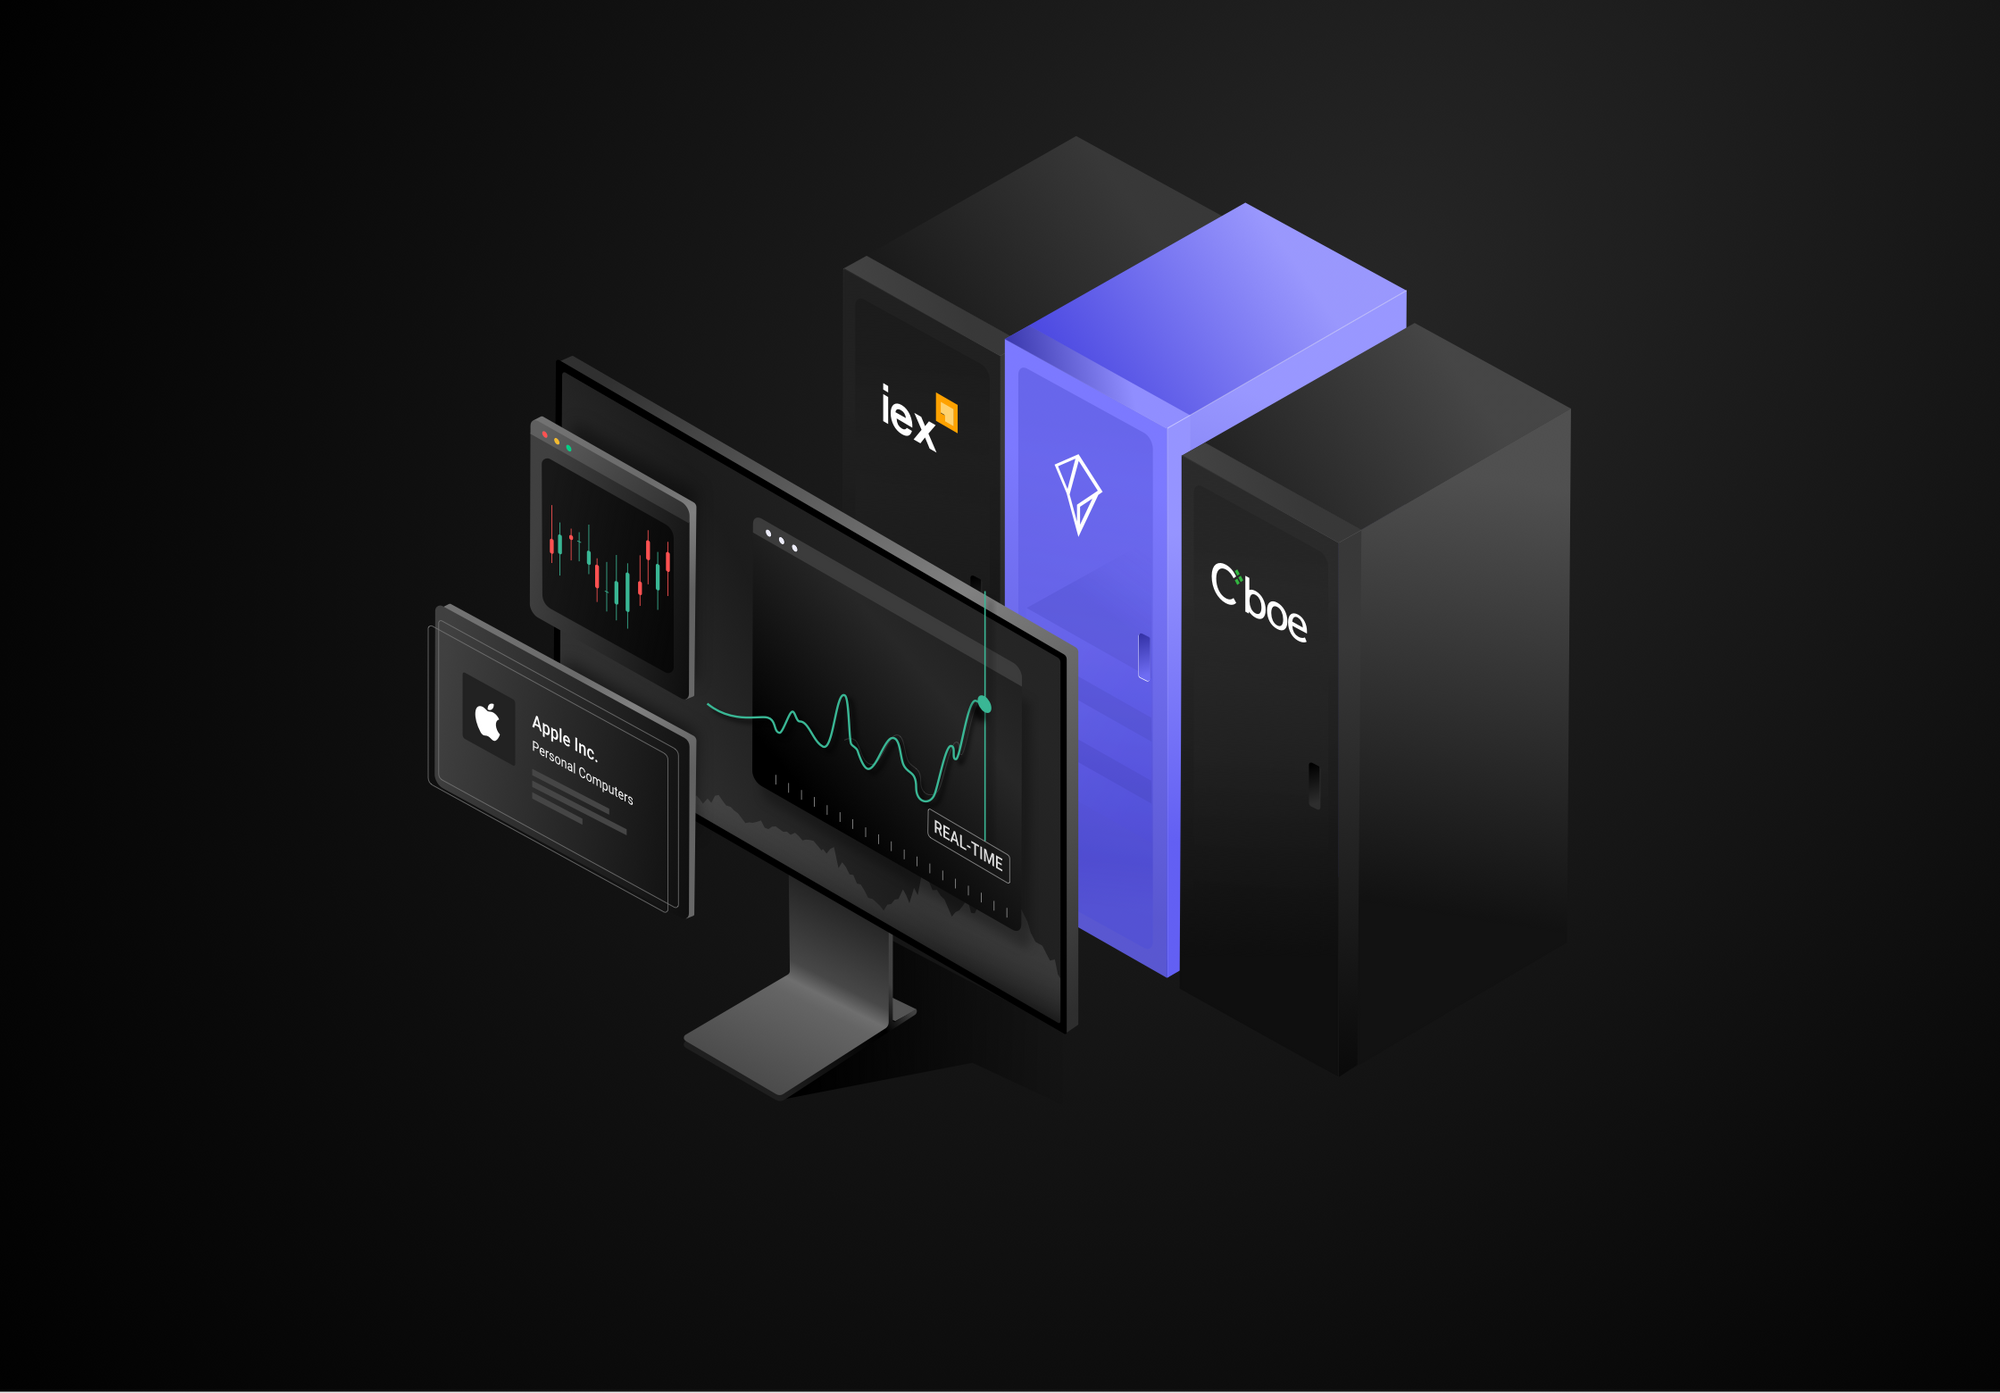 Polygon.io partners with Cboe to deliver market data APIs for apps, websites, and displays.